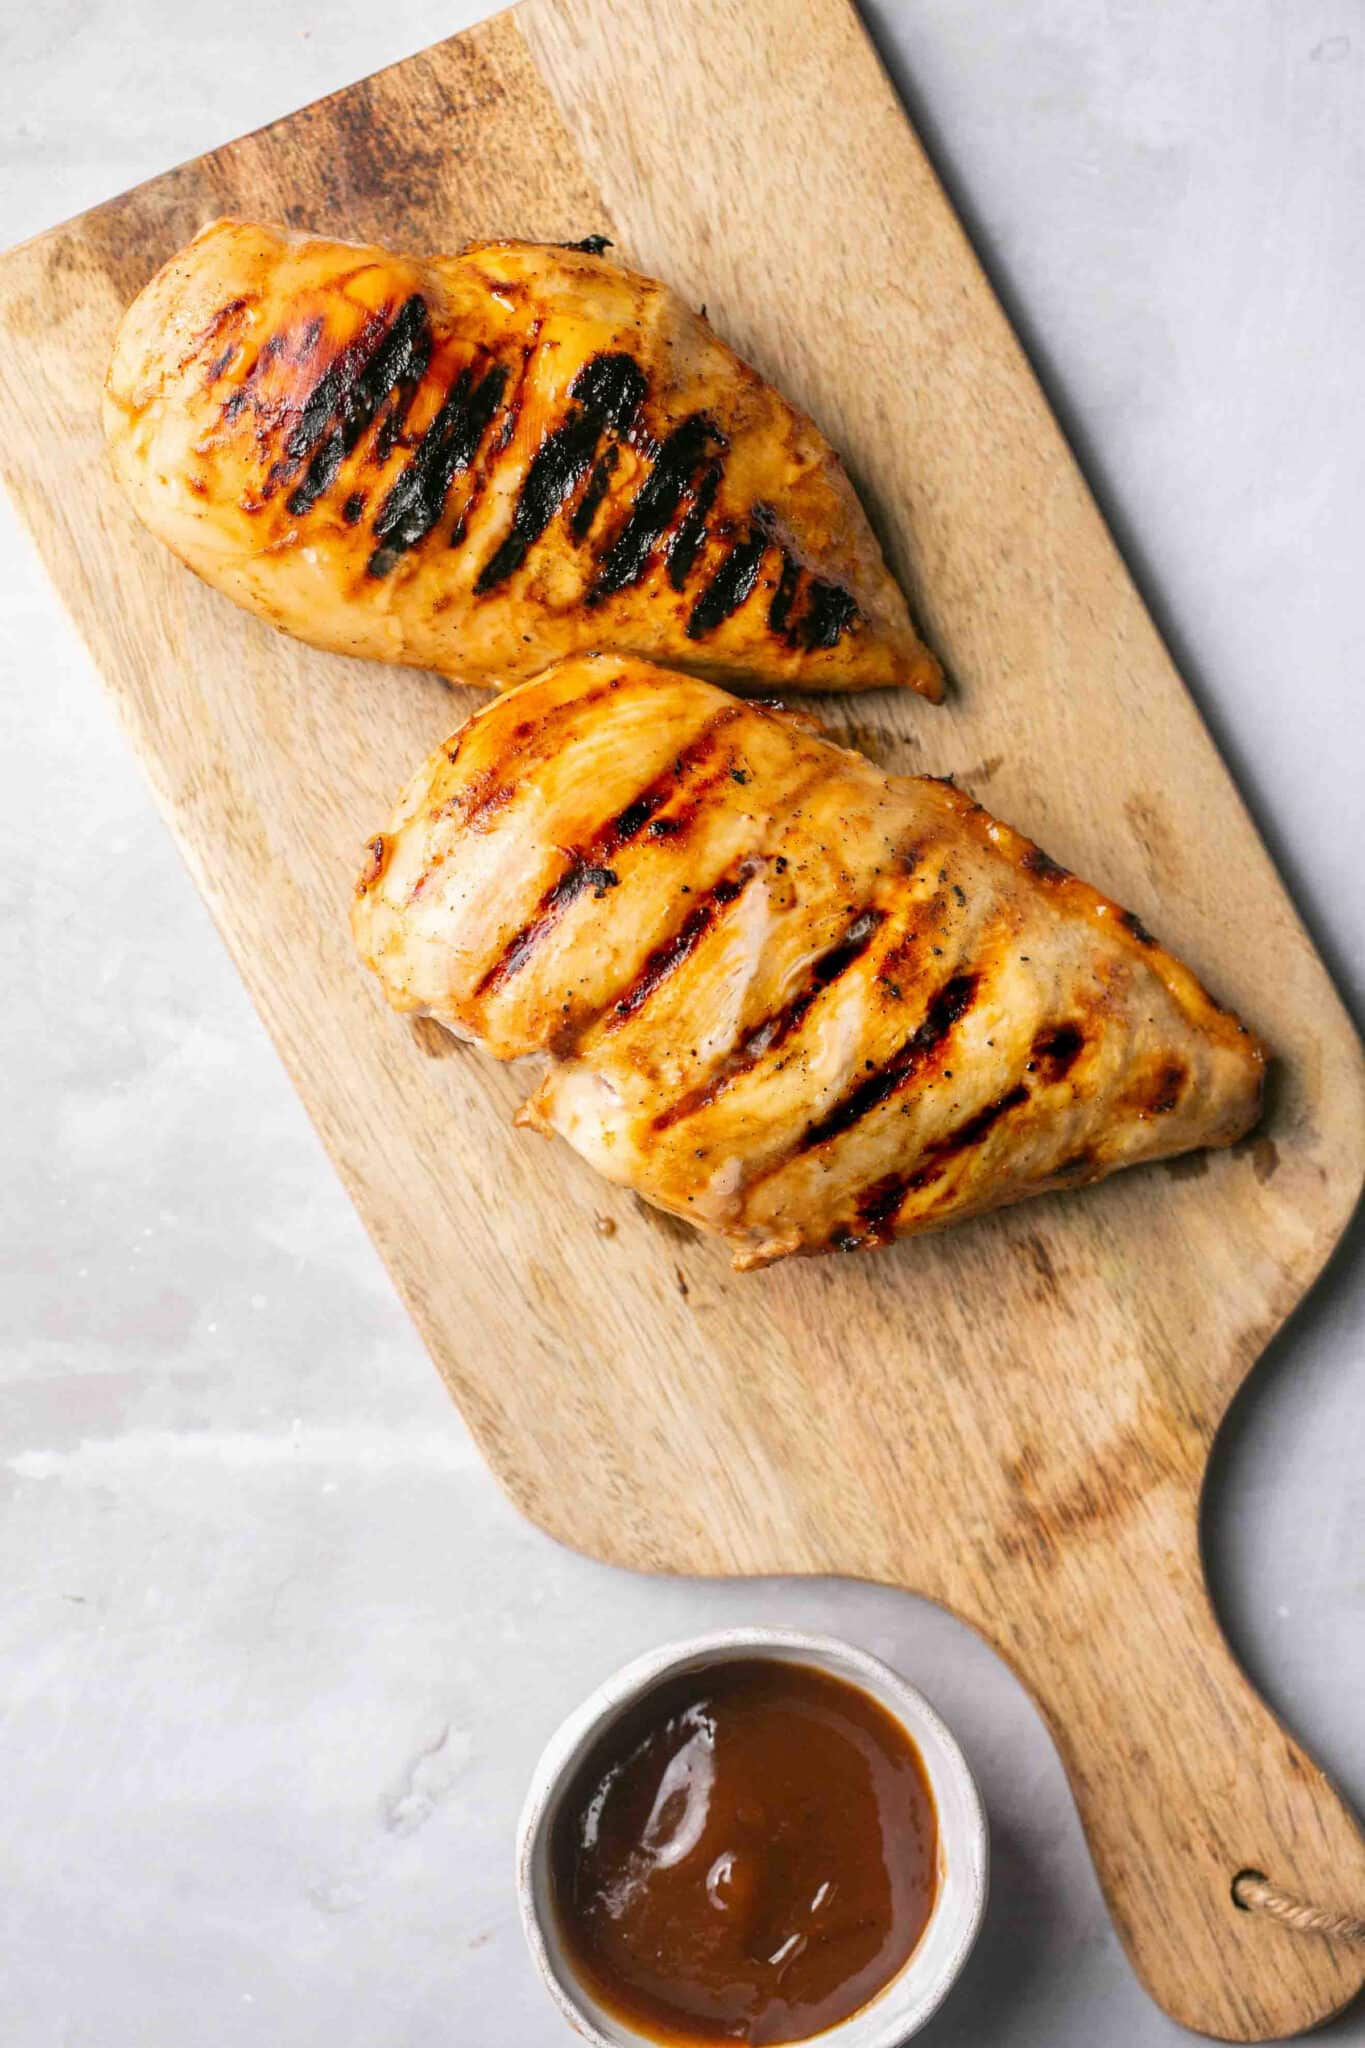 Grilled chicken breasts on a cutting board.